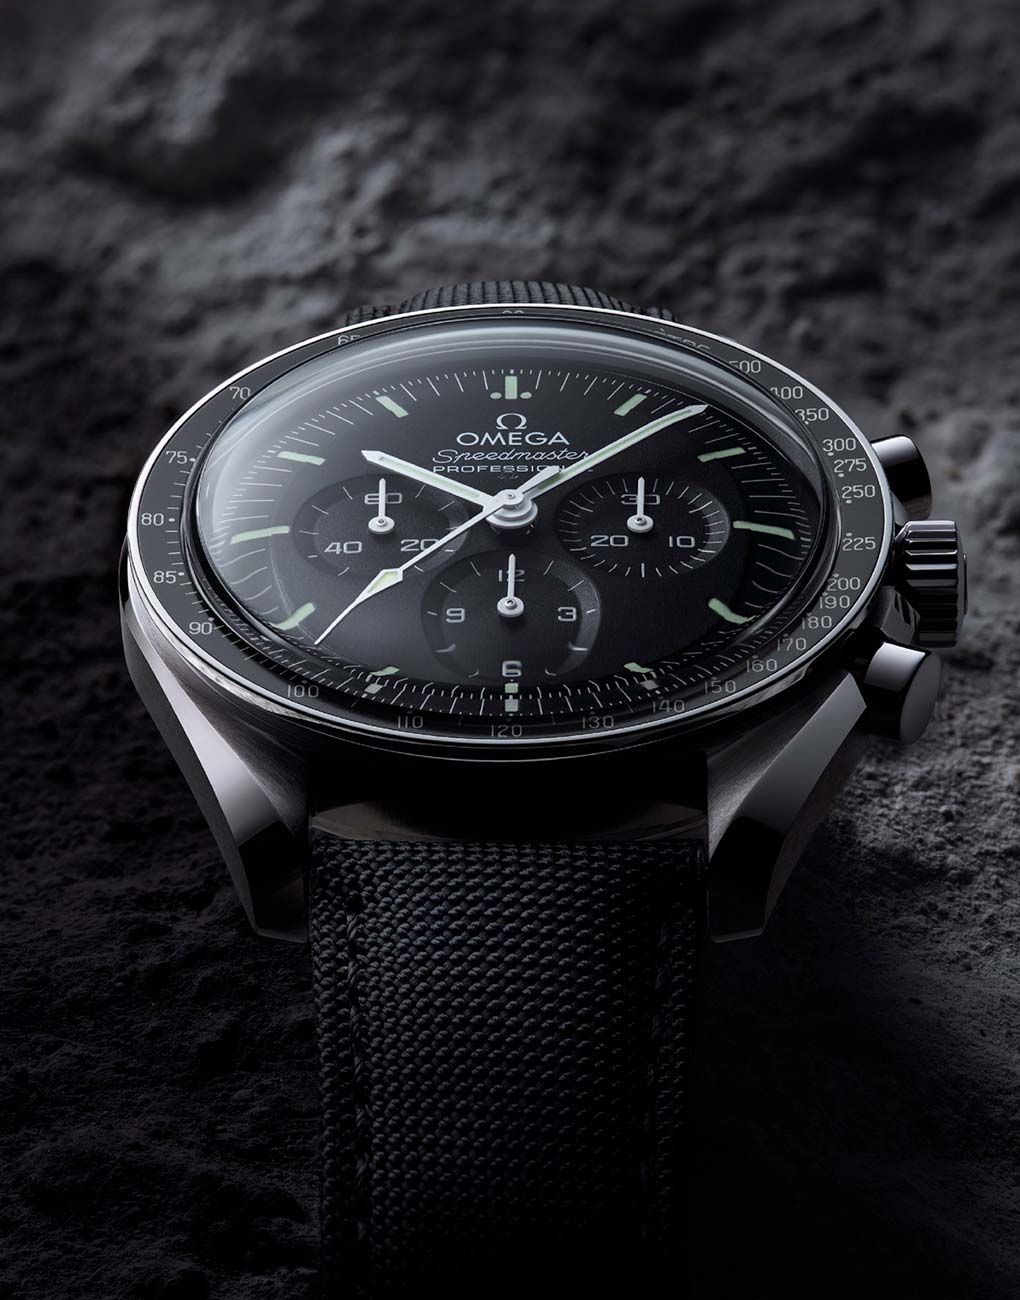 FALSK Målestok kompas The Top 10 Omega Watches in India—The Watch Guide, Ethos